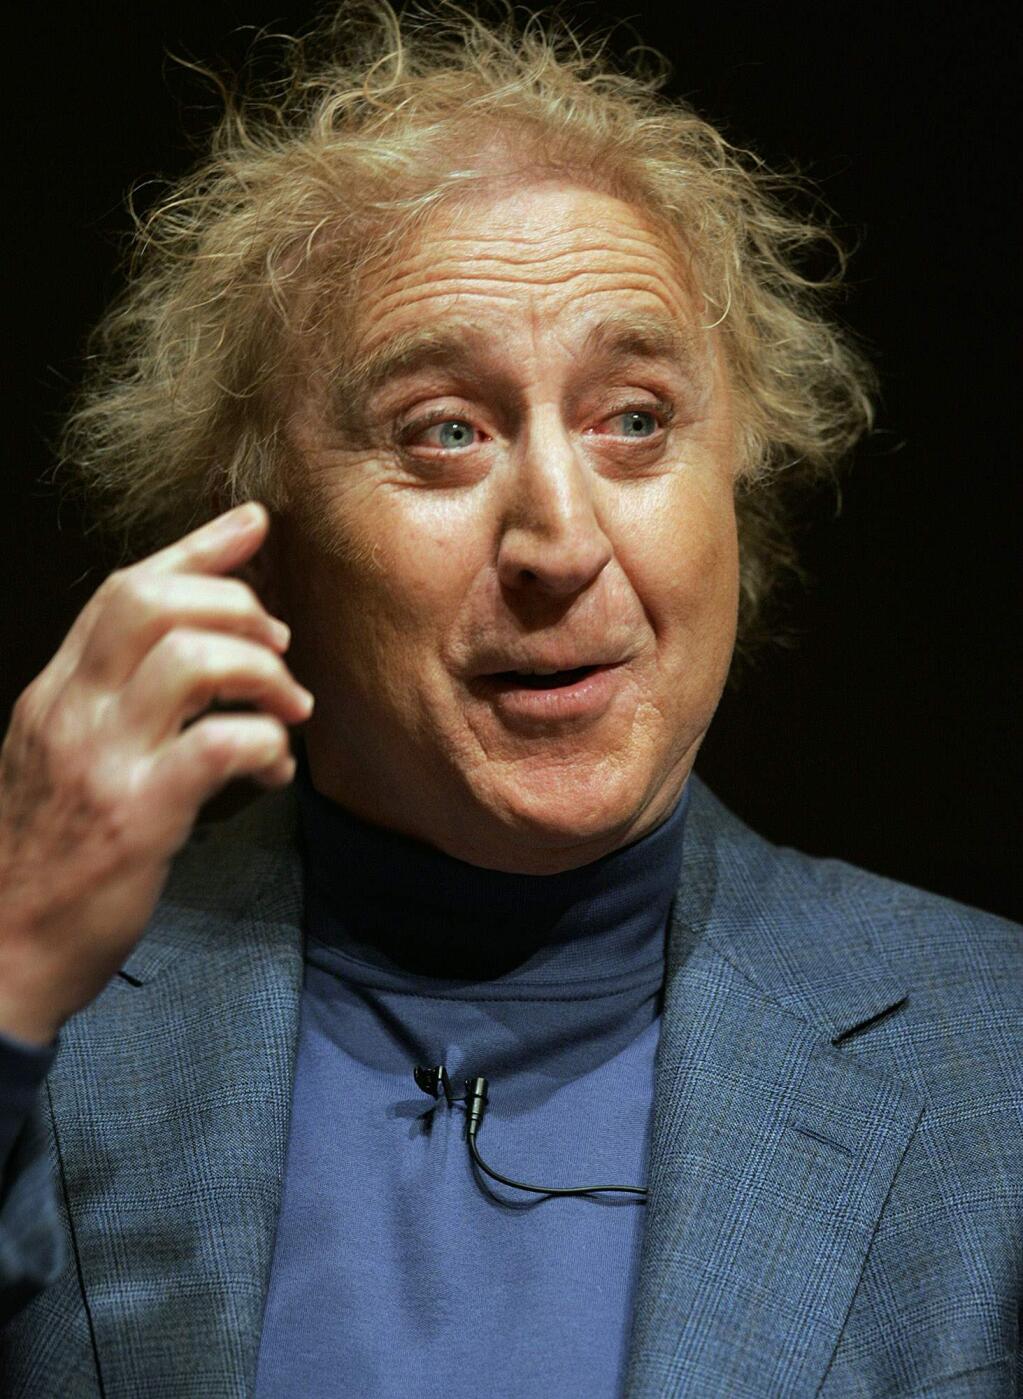 FILE - In this March 16, 2005 file photo, actor Gene Wilder speaks about his life and career at Boston University in Boston. Wilder, who starred in such film classics as 'Willy Wonka and the Chocolate Factory' and 'Young Frankenstein' has died. He was 83. (AP Photo/Steven Senne, File)